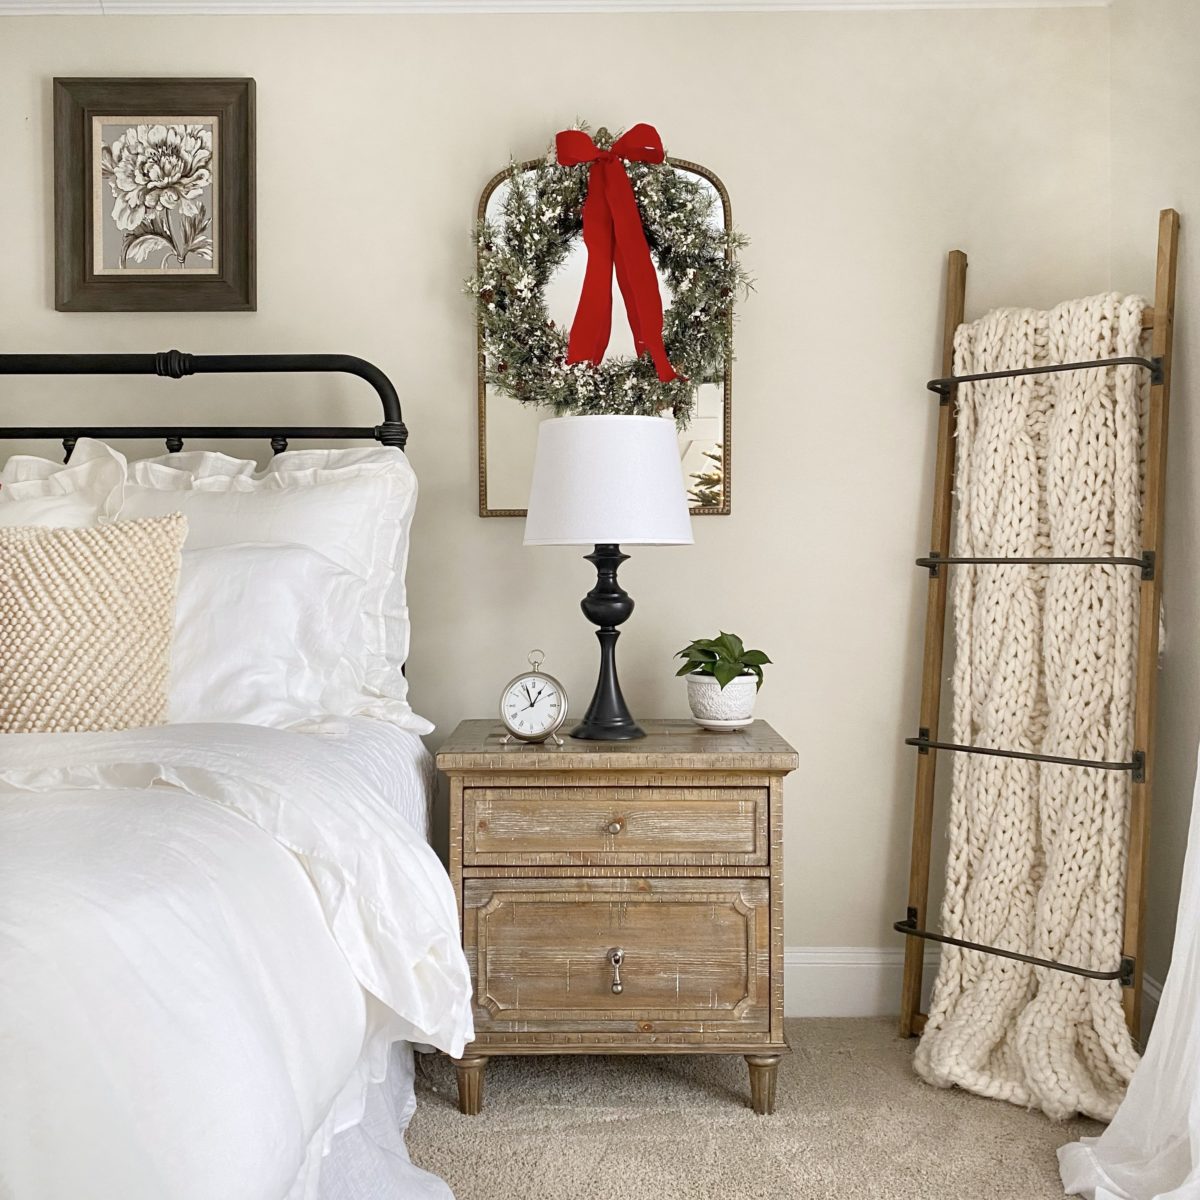 The opposite side of the bed with a mirror on the wall and wreath hanging from it with a red ribbon. In the corner is a blanket ladder with a cozy knit blanket on it.